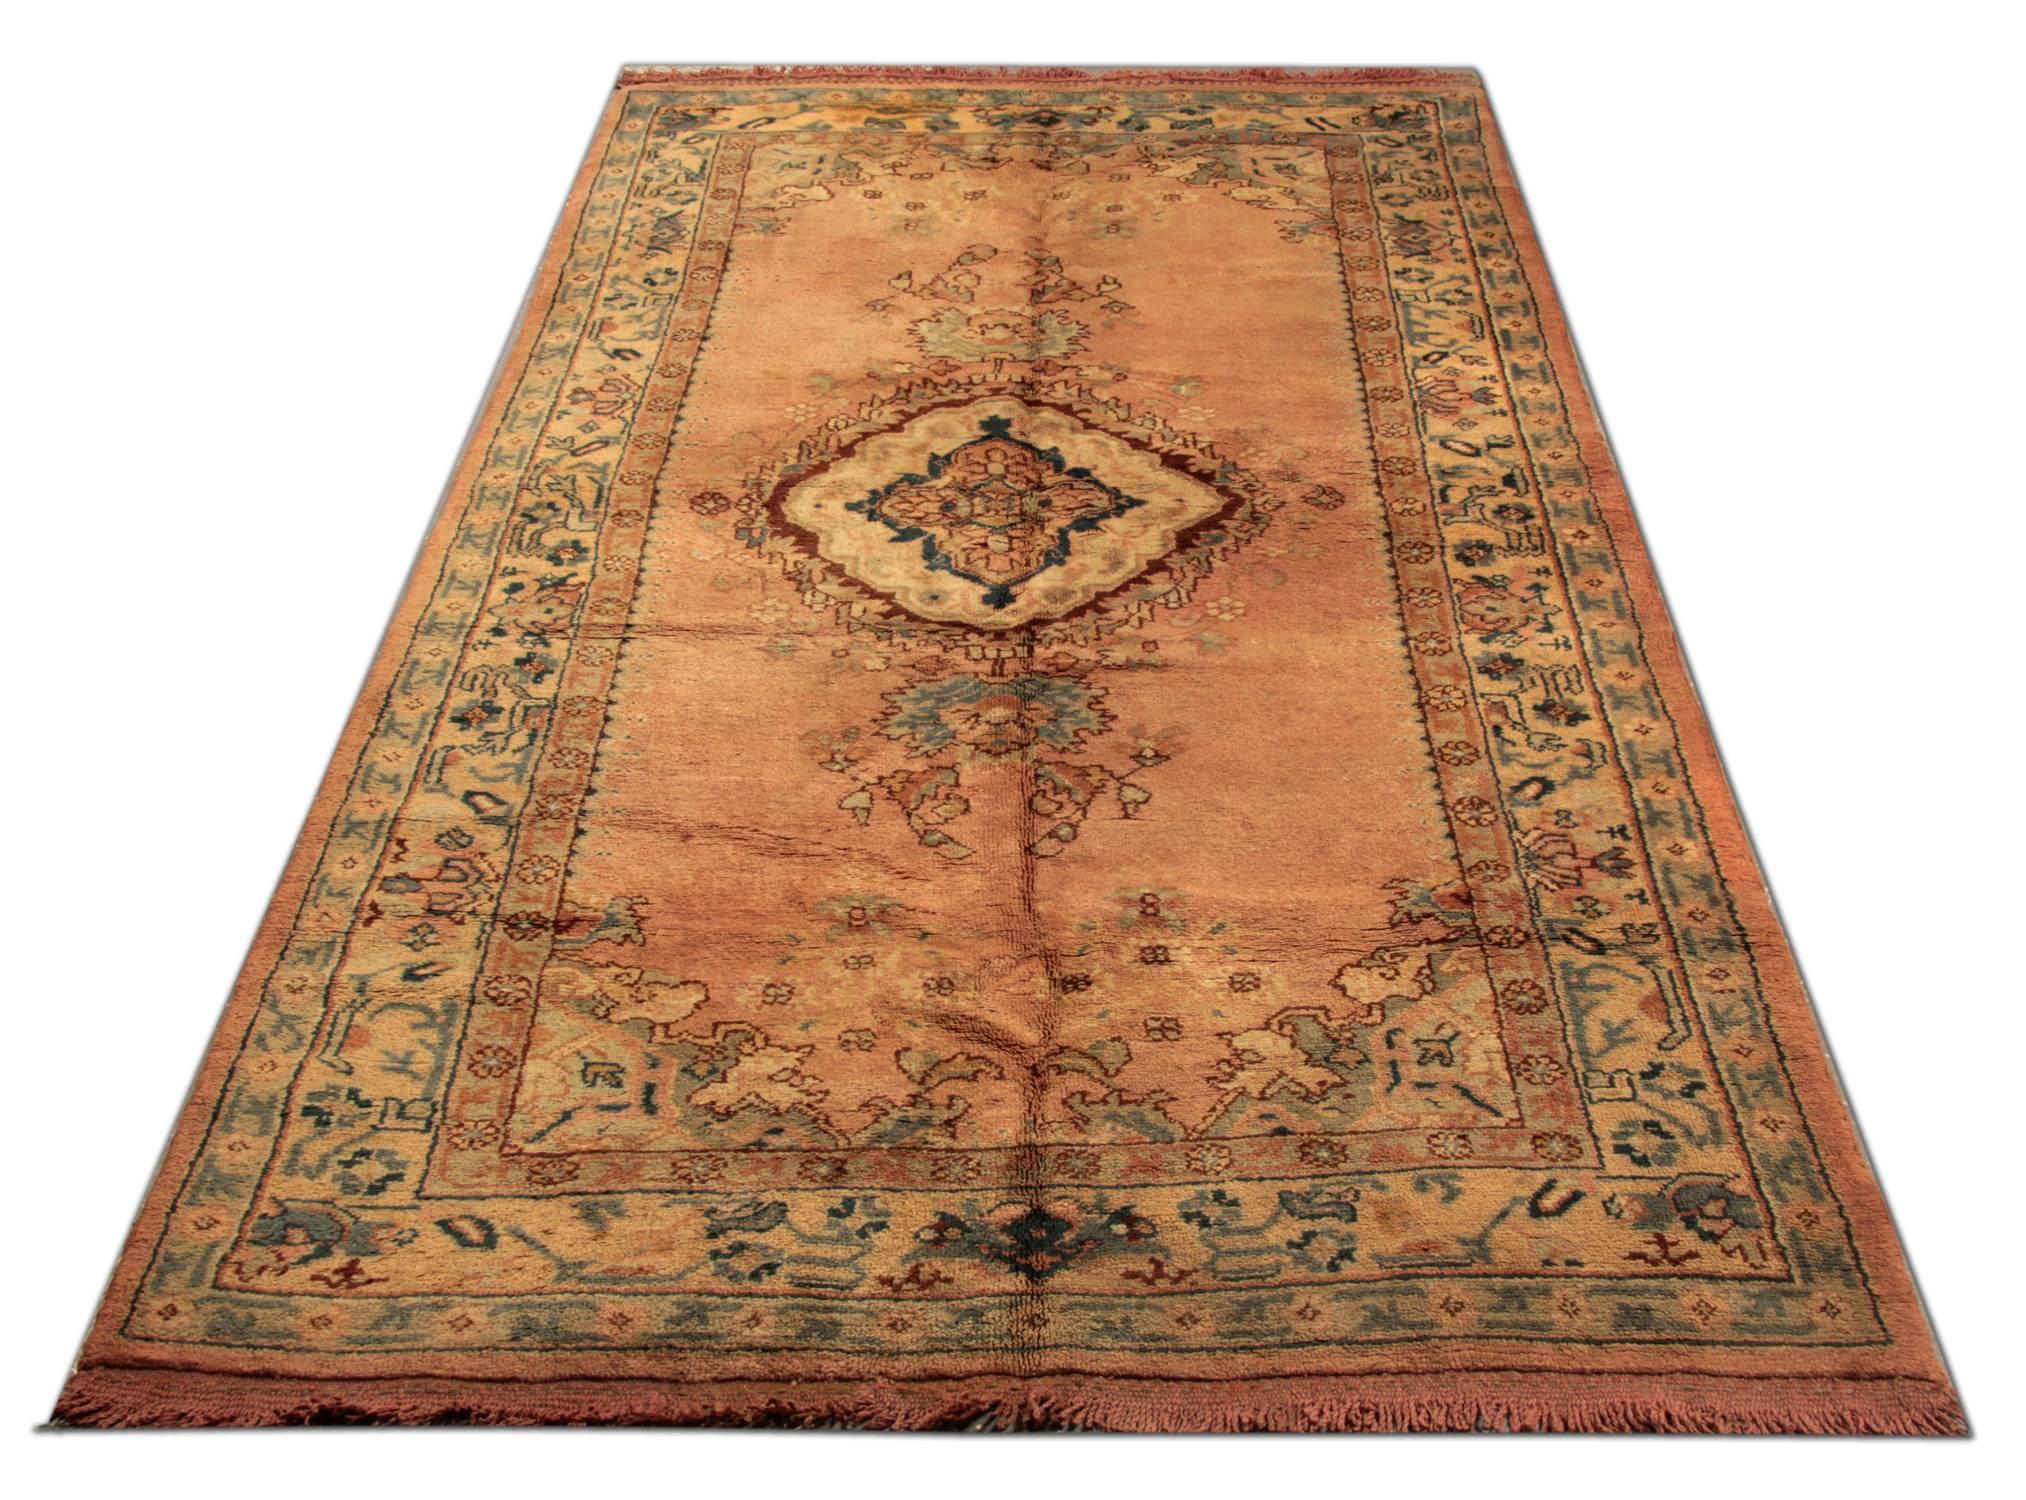 This Oushak rug is a beautiful hand knotted Turkish Anatolian rug with a very elegant tribal geometric design. It has made with all wool and vibrant natural dyes. The combination of rust red and gold made a very luxurious rug with an artistic design